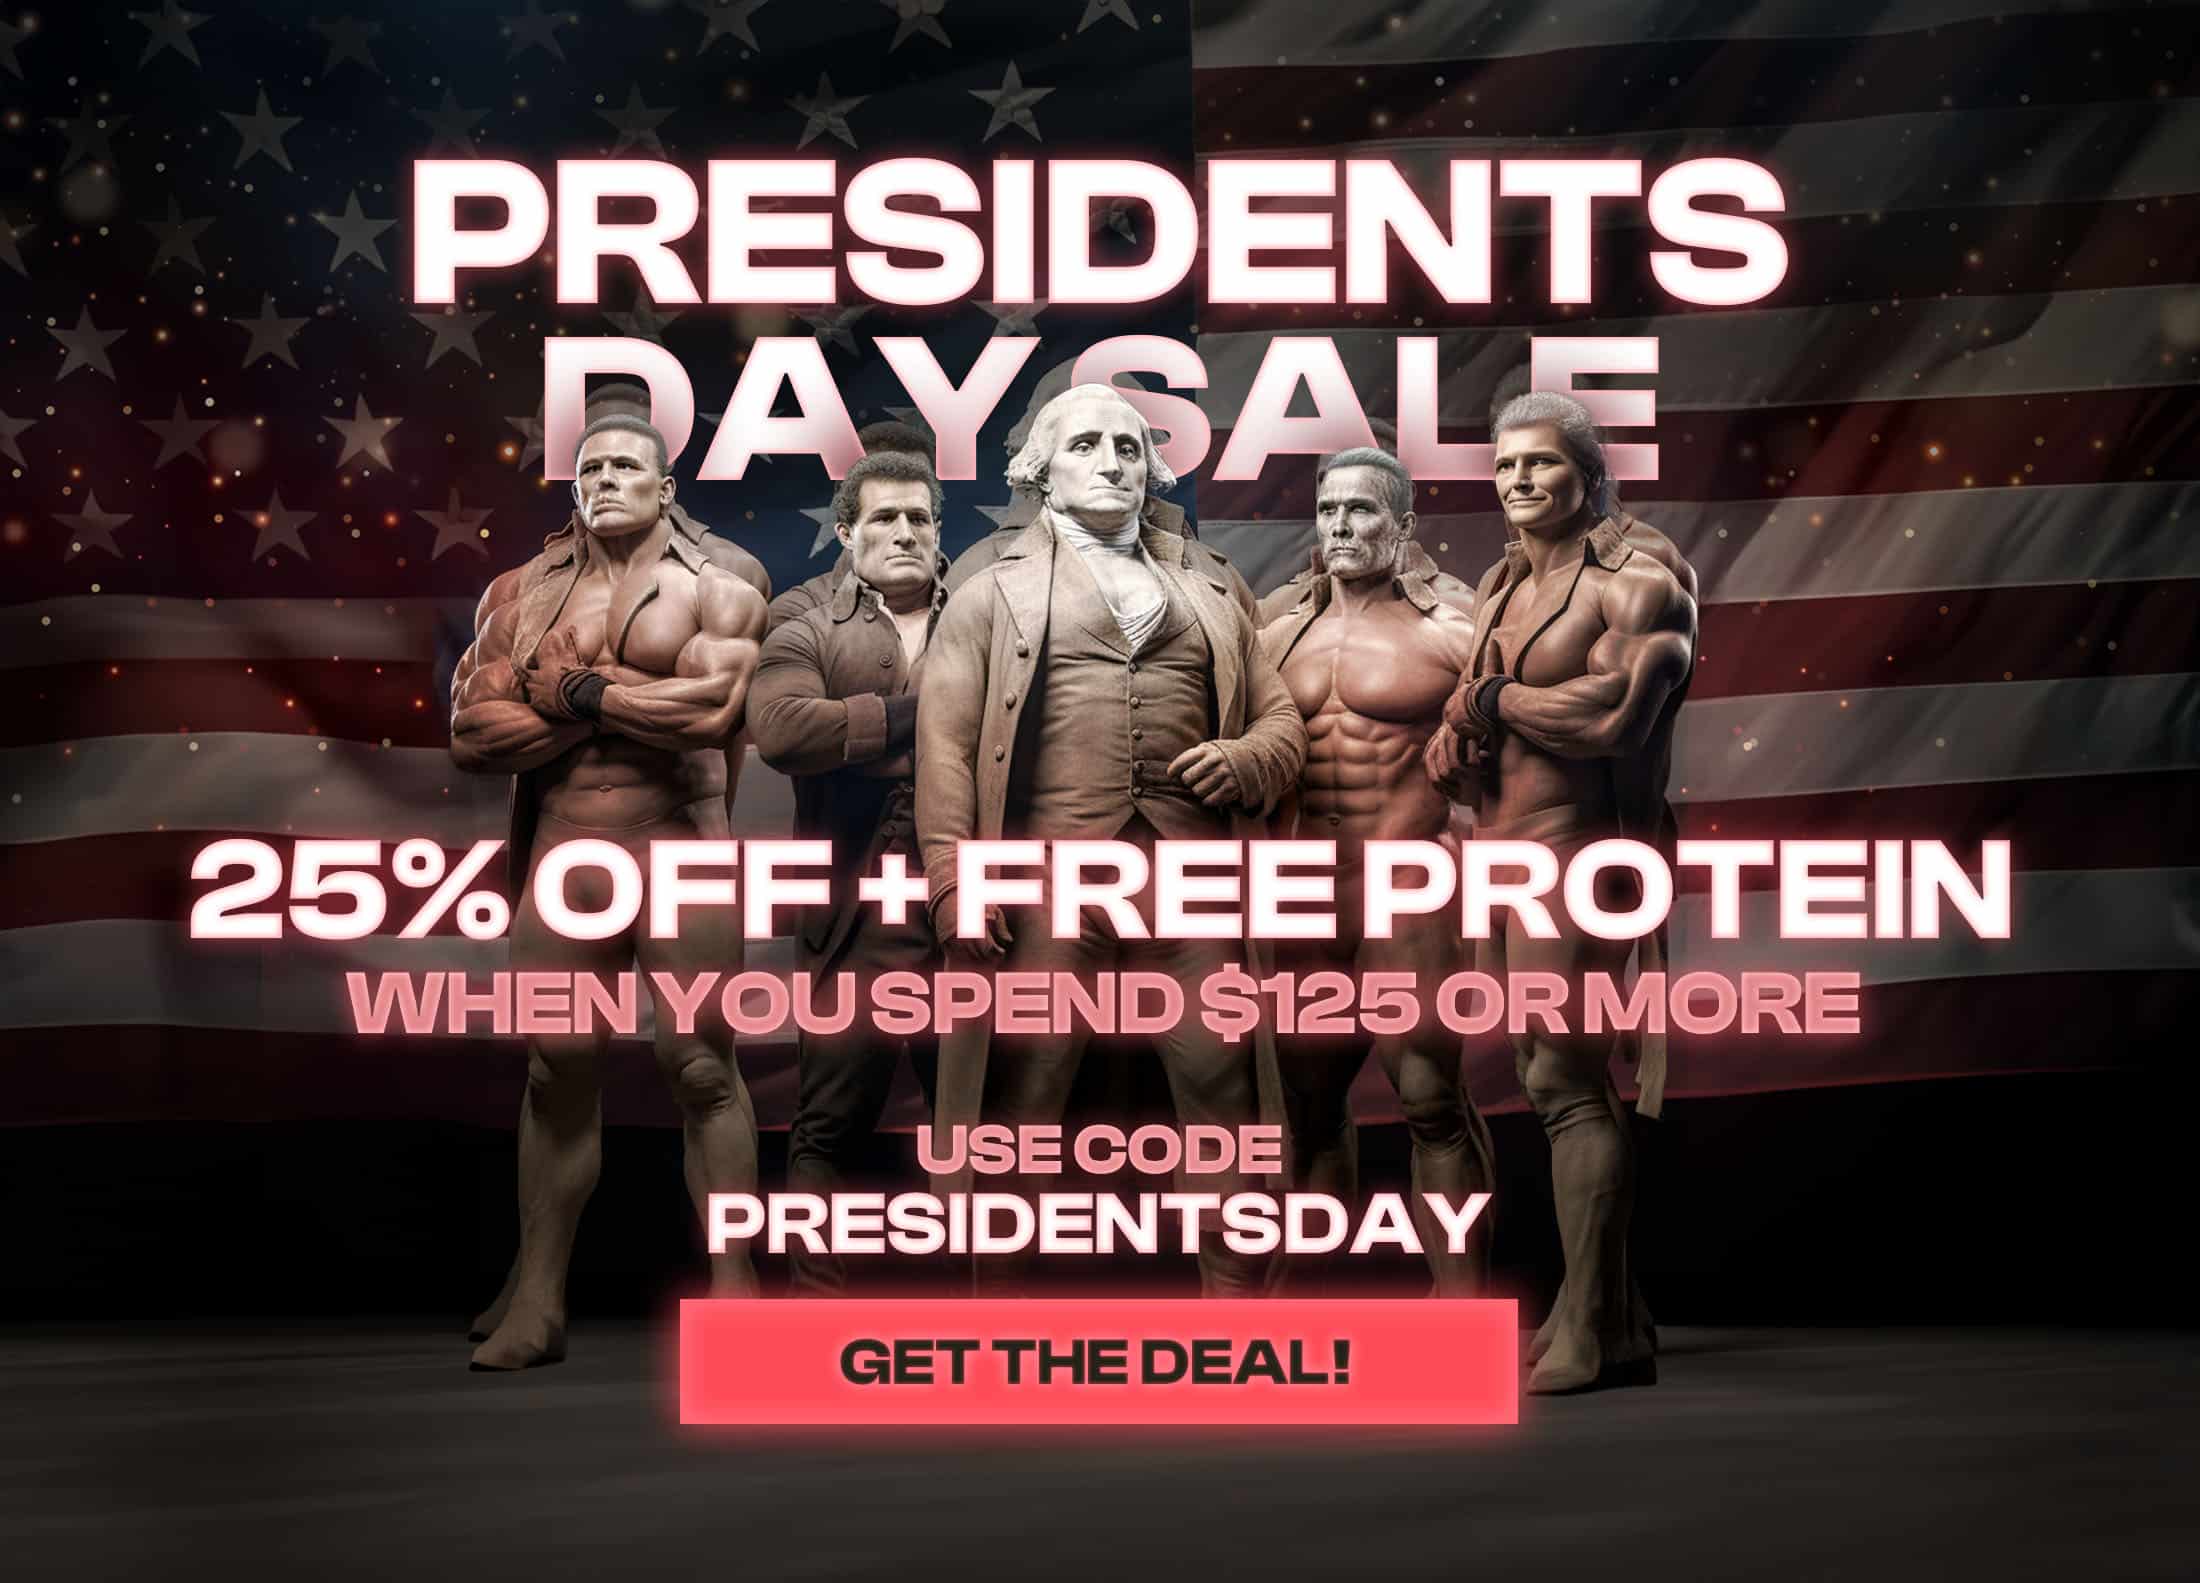 President's Day Sale! 25% Off + Free Protein when you spend $125 or more. Use code PRESIDENTSDAY. Get The Deal!